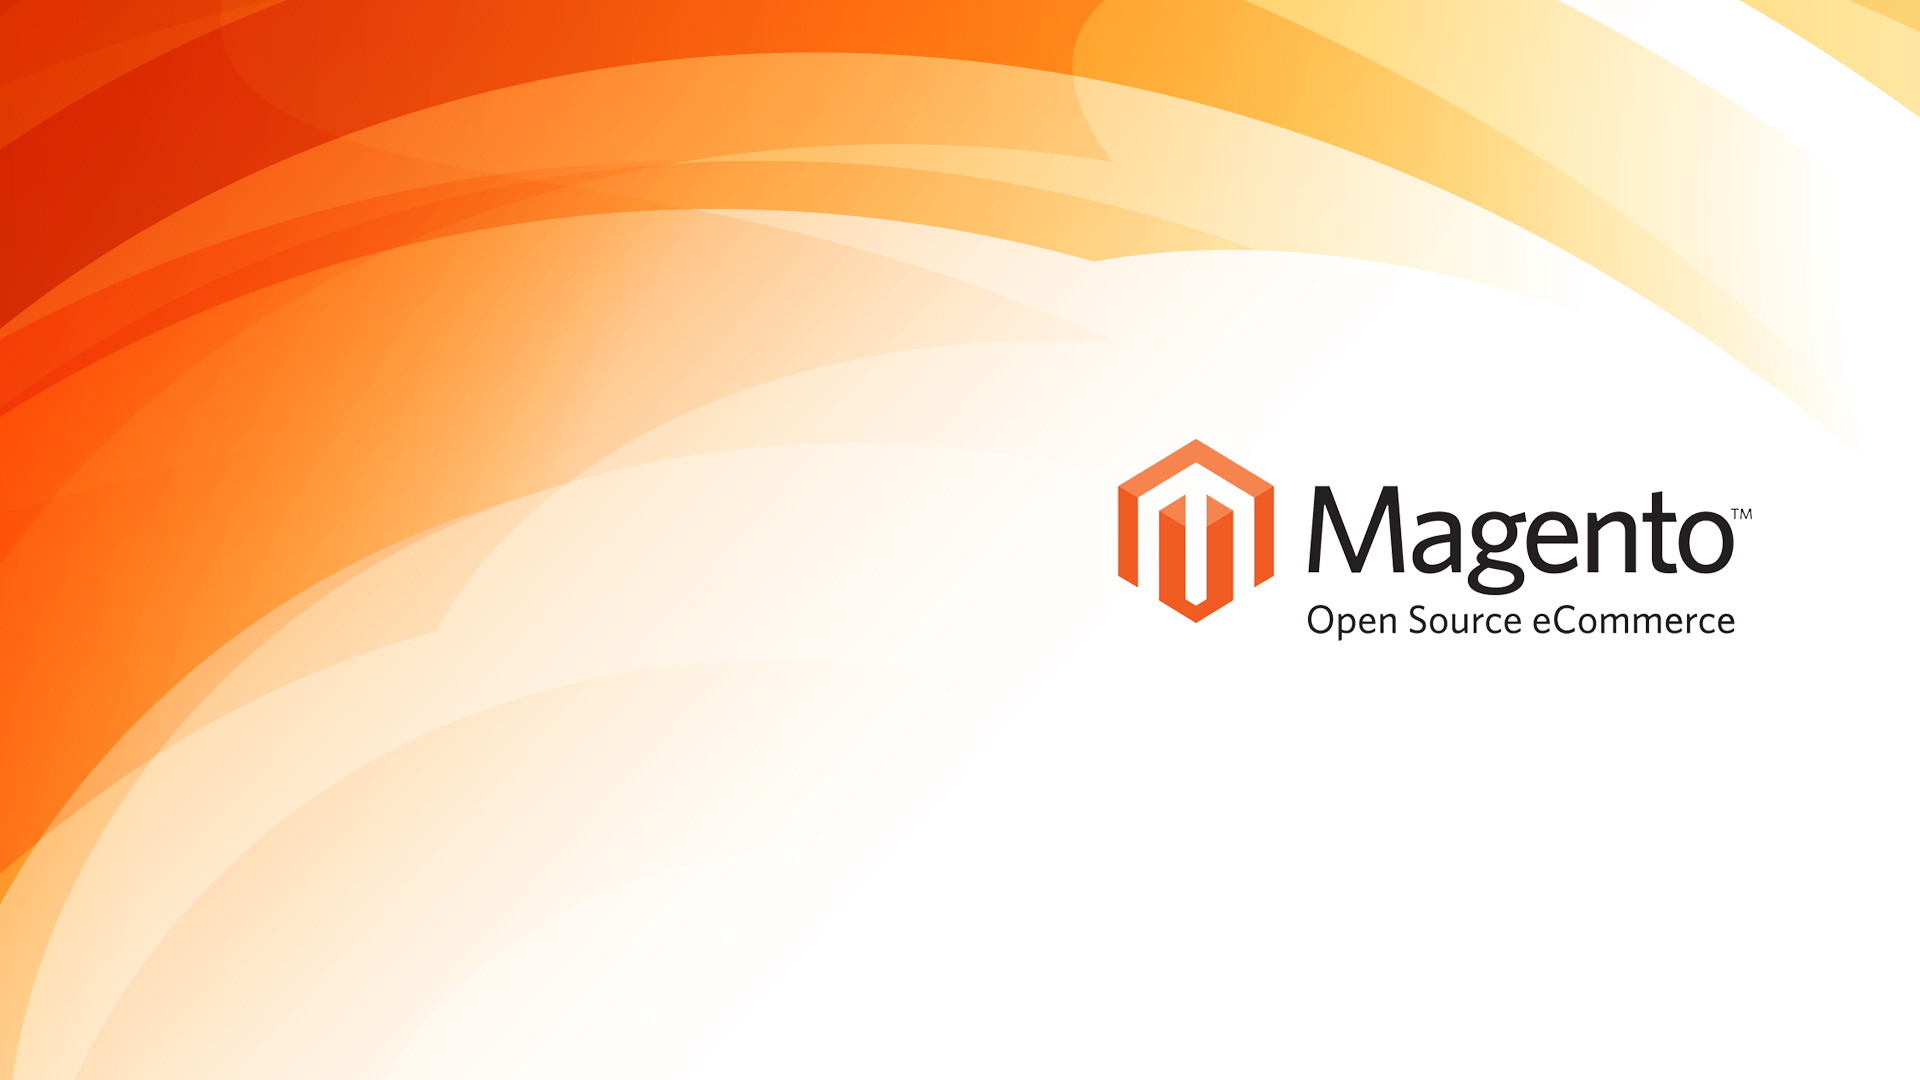 Magento 2 Wallpapers Pack From Ubertheme - Magento 2 Wall Paper - HD Wallpaper 